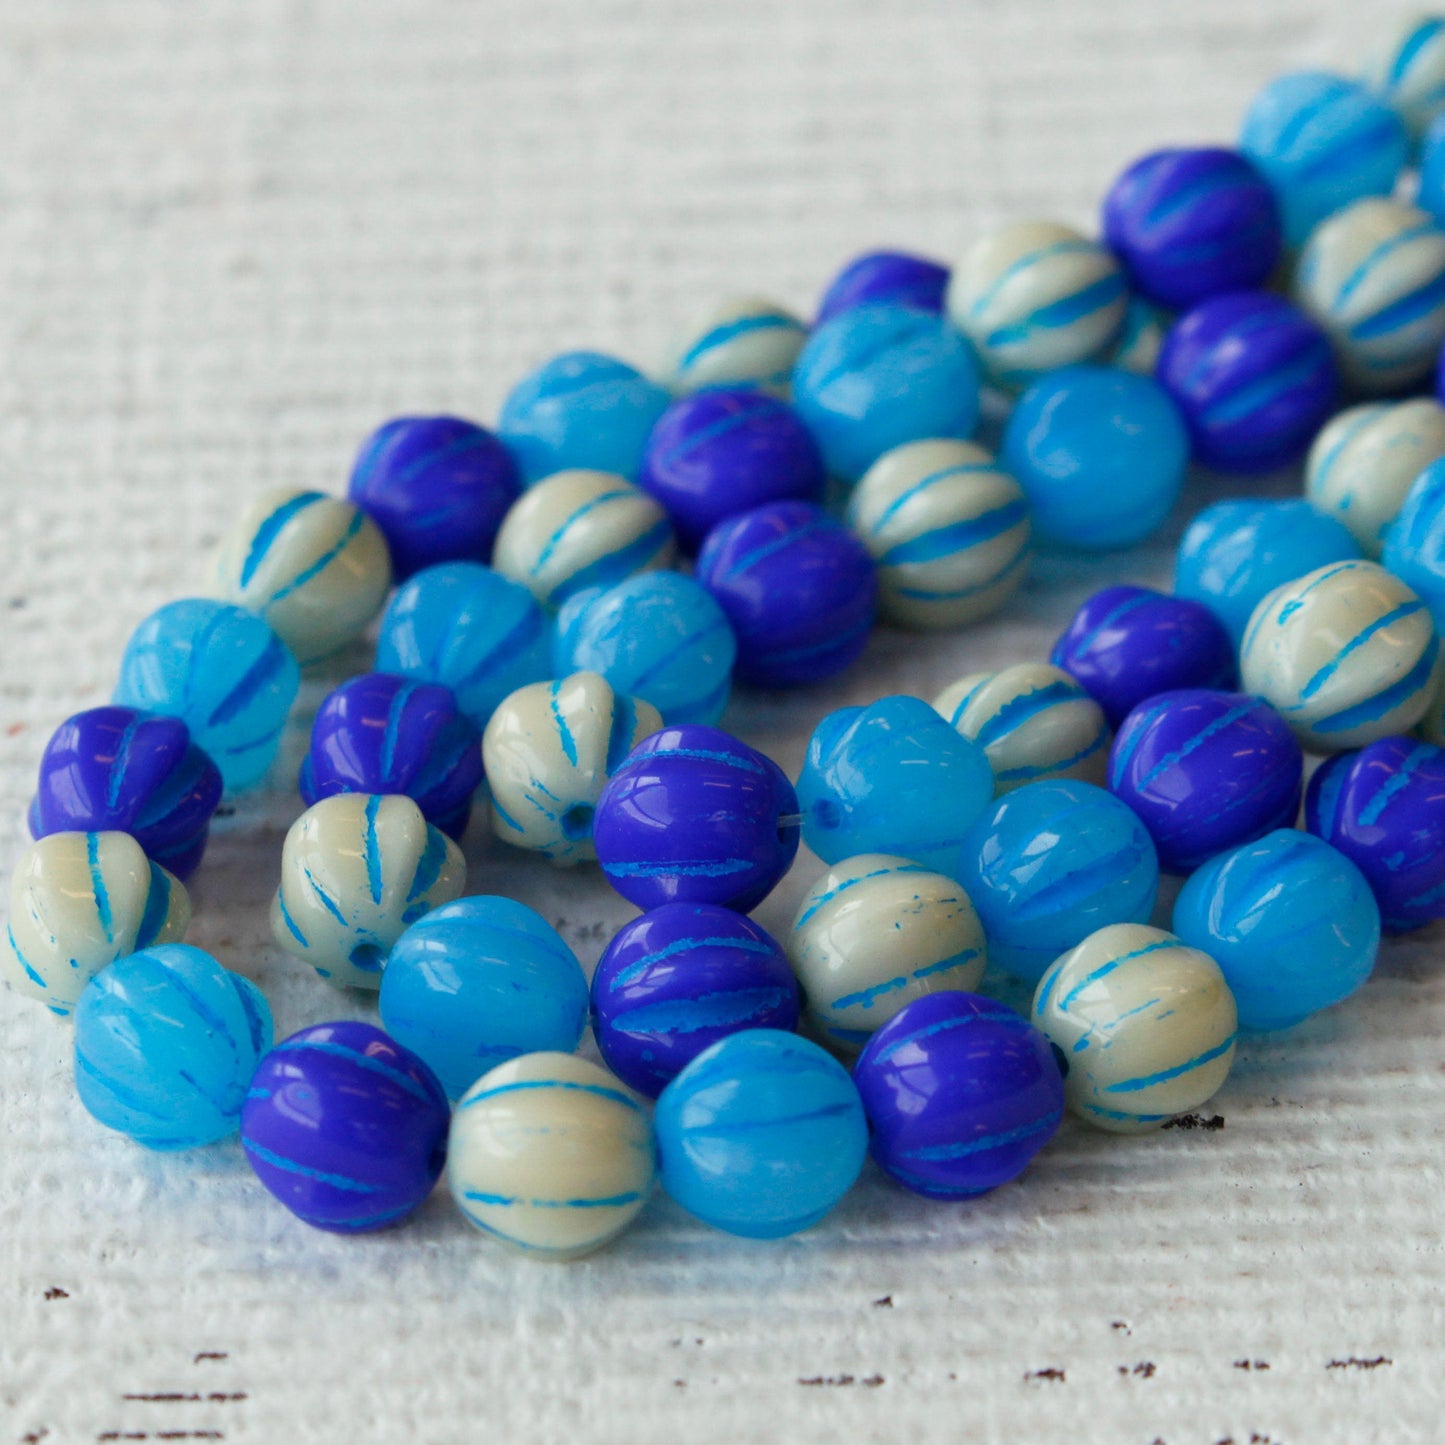 6mm Melon Beads - Blue Mix with Turquoise Wash - 25 Beads